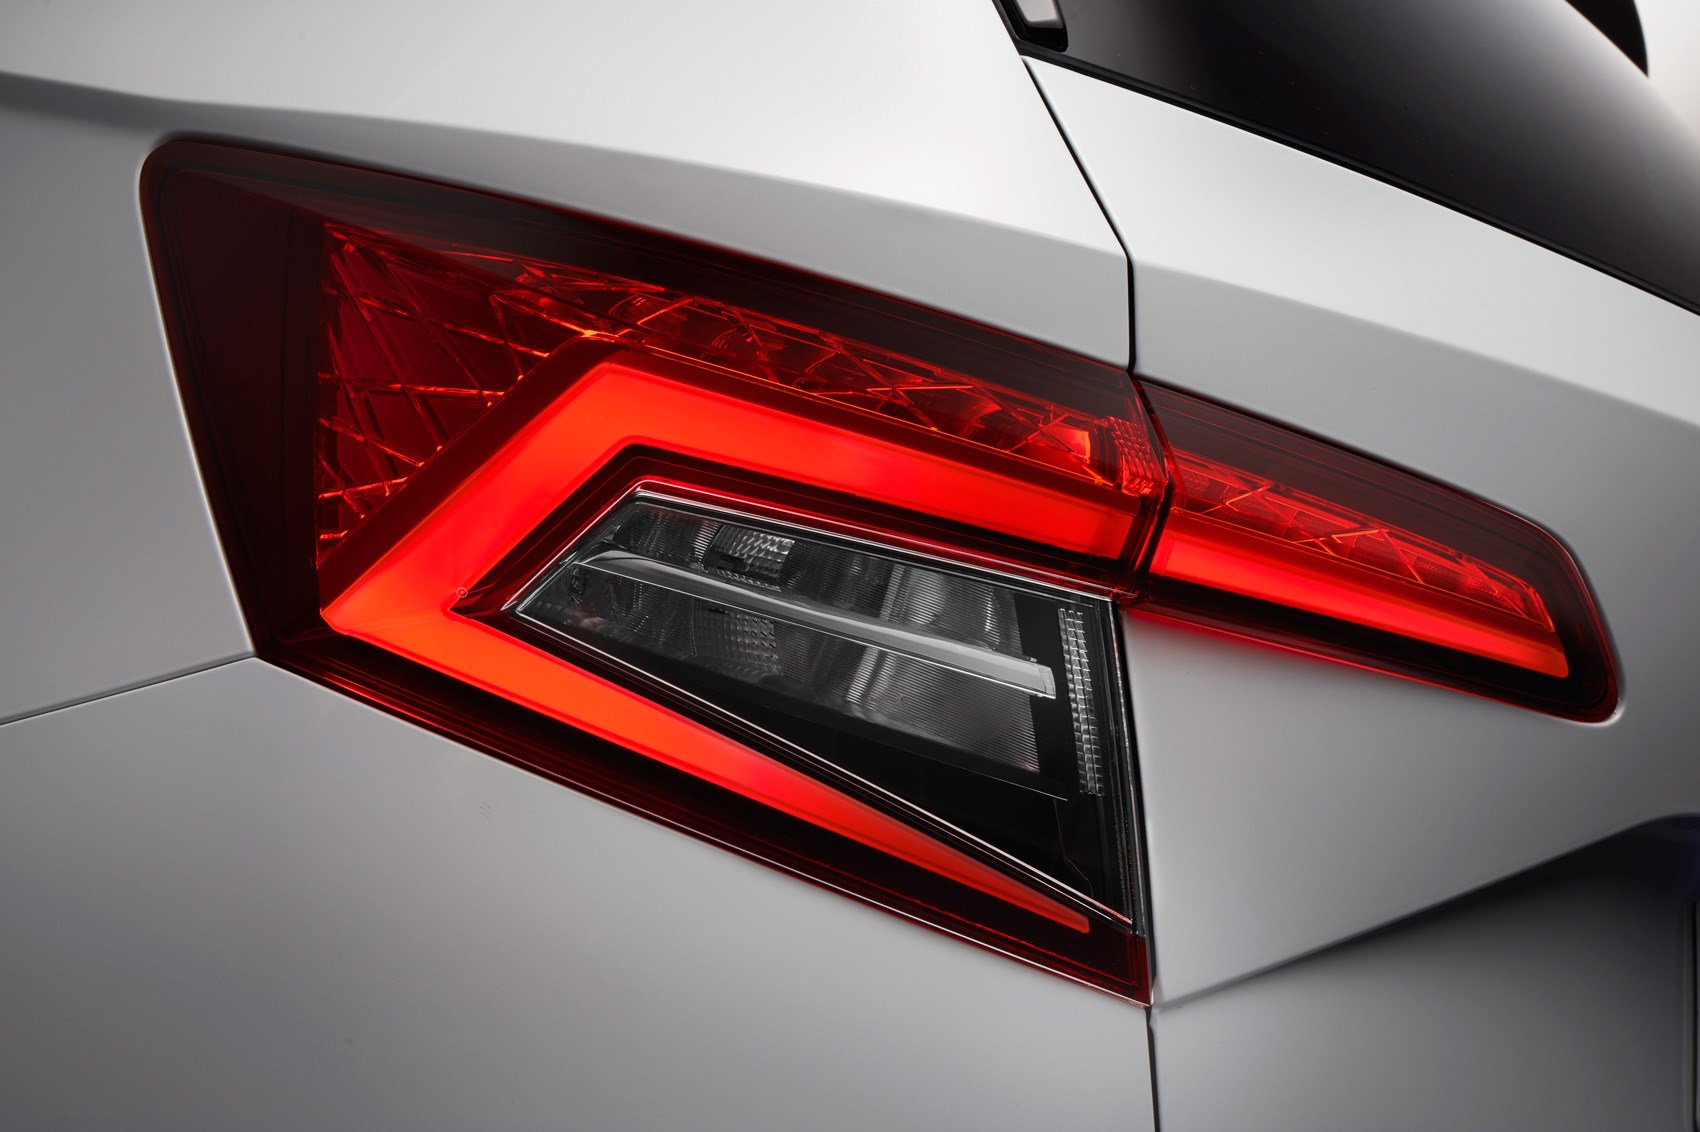 Skoda Karoq SUV Official Images Released Ahead of World Premiere Tail lamps